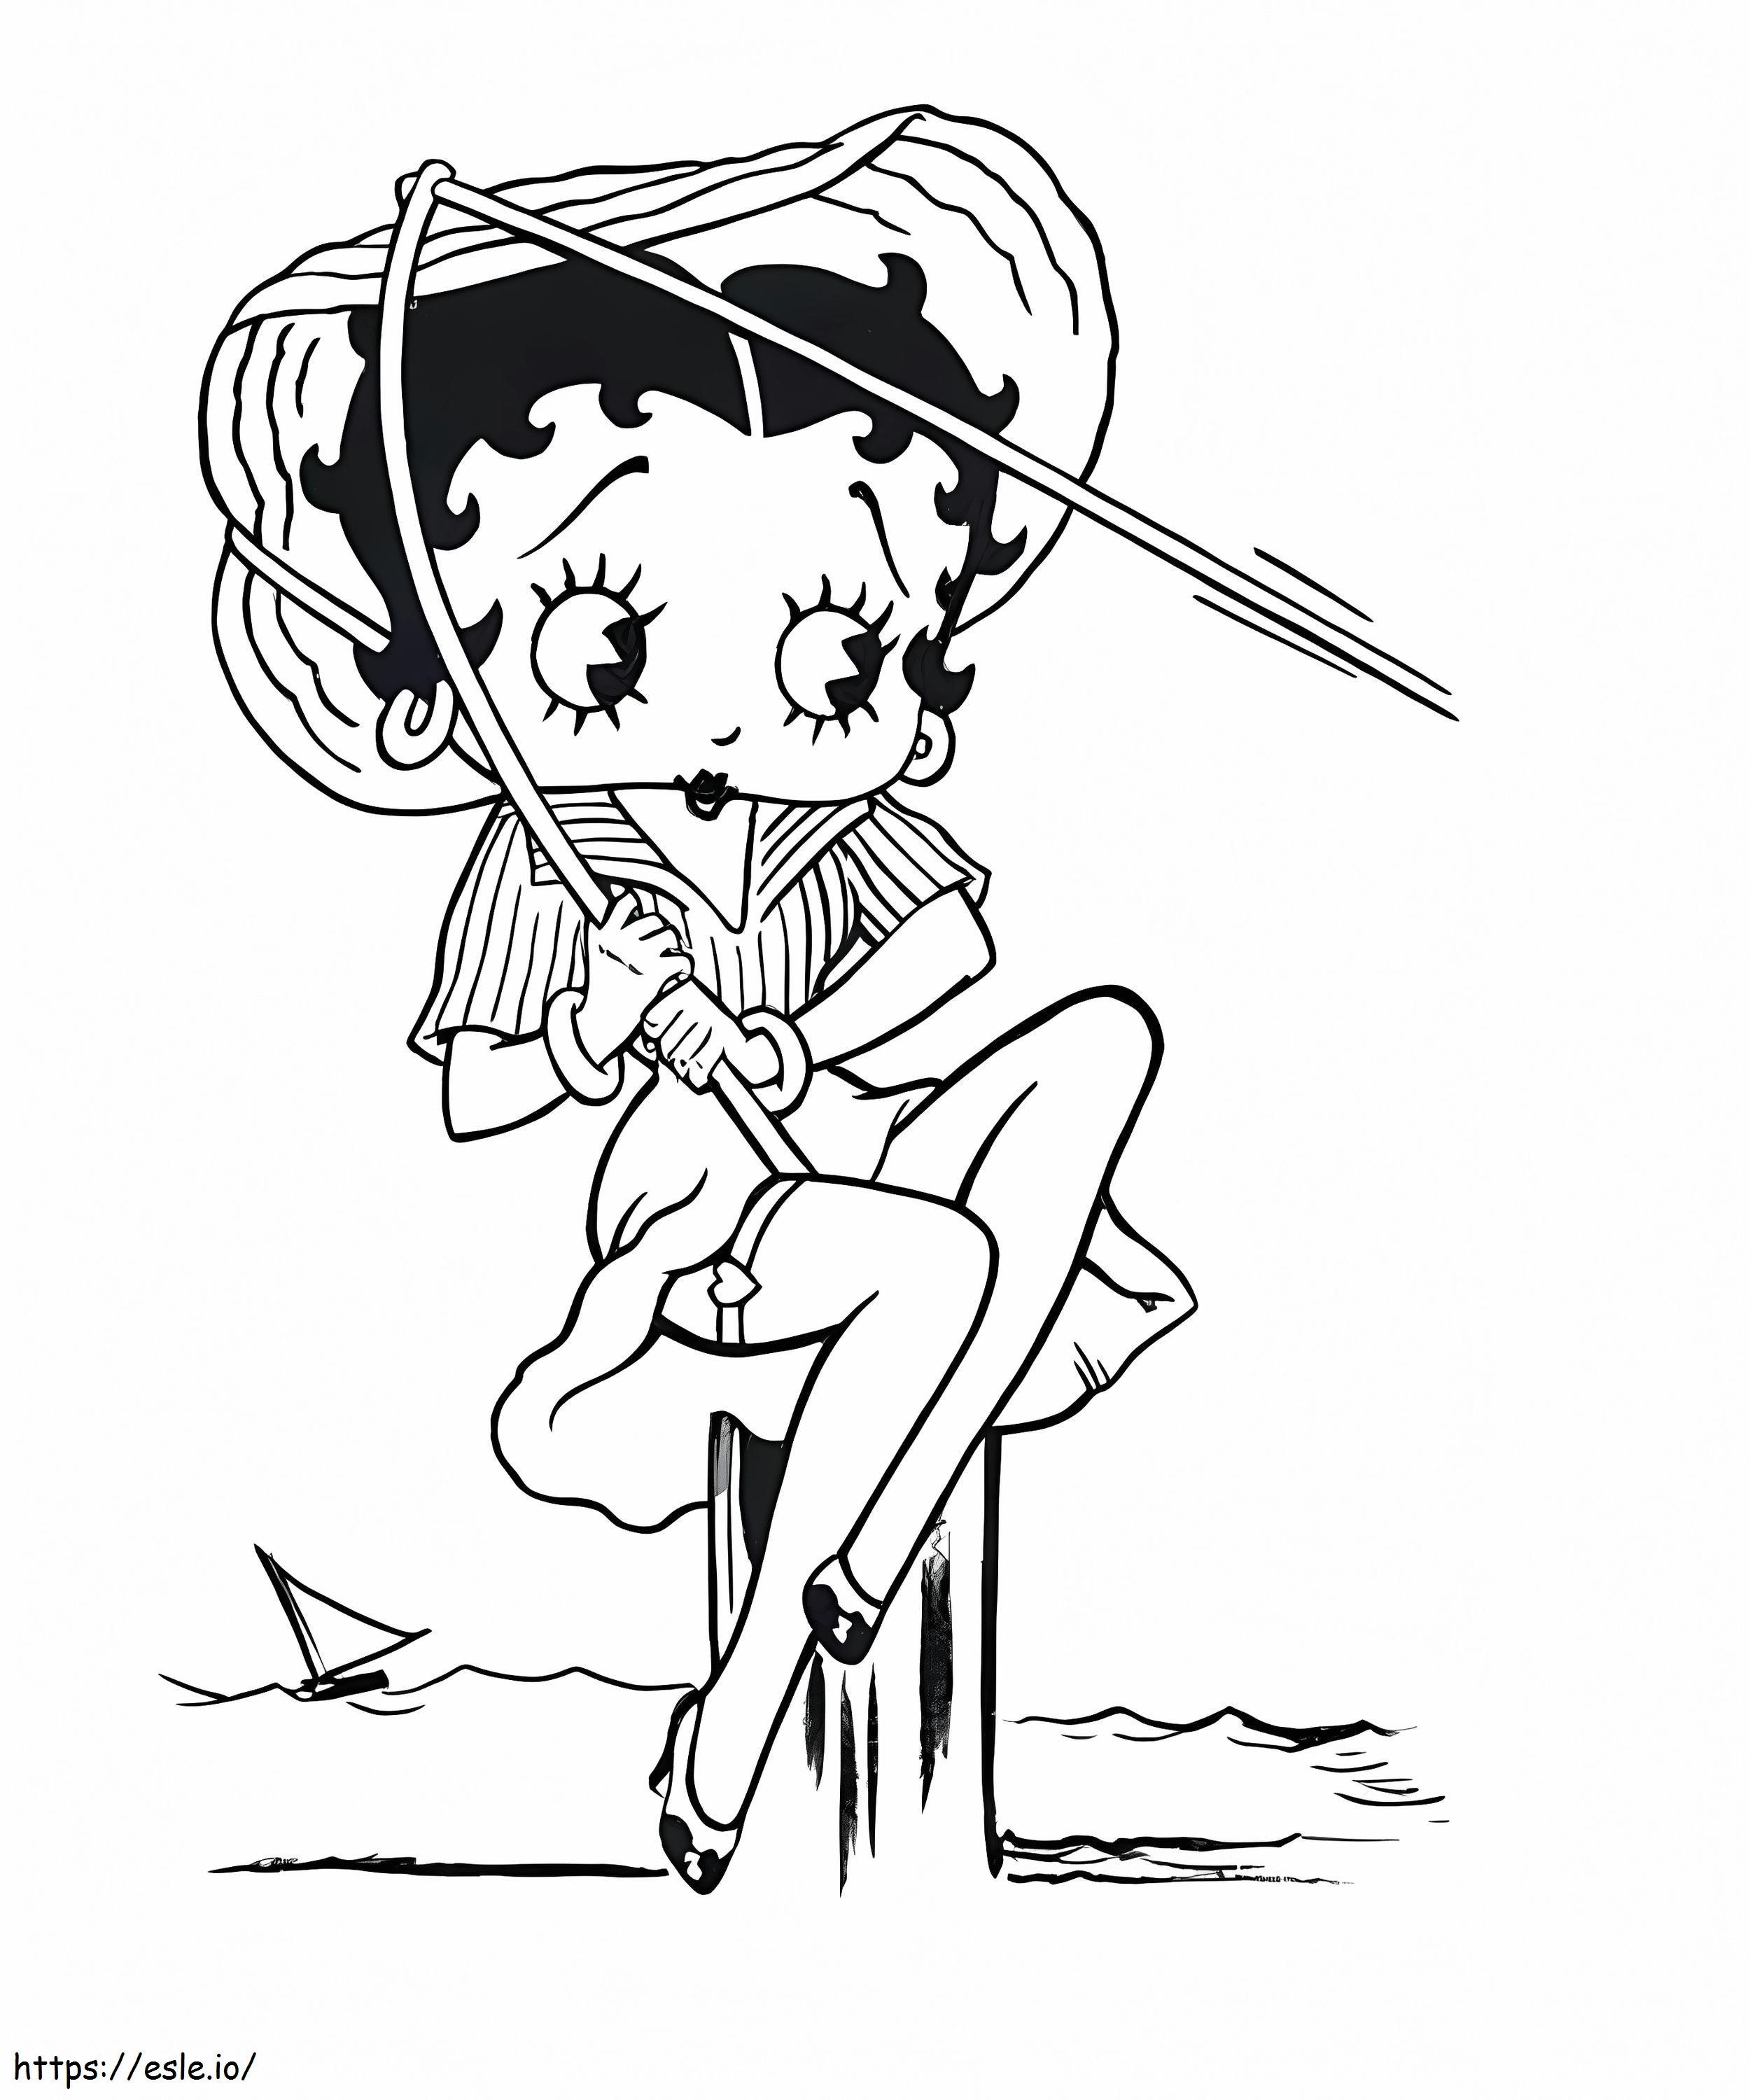 Betty Boop Goes Fishing coloring page